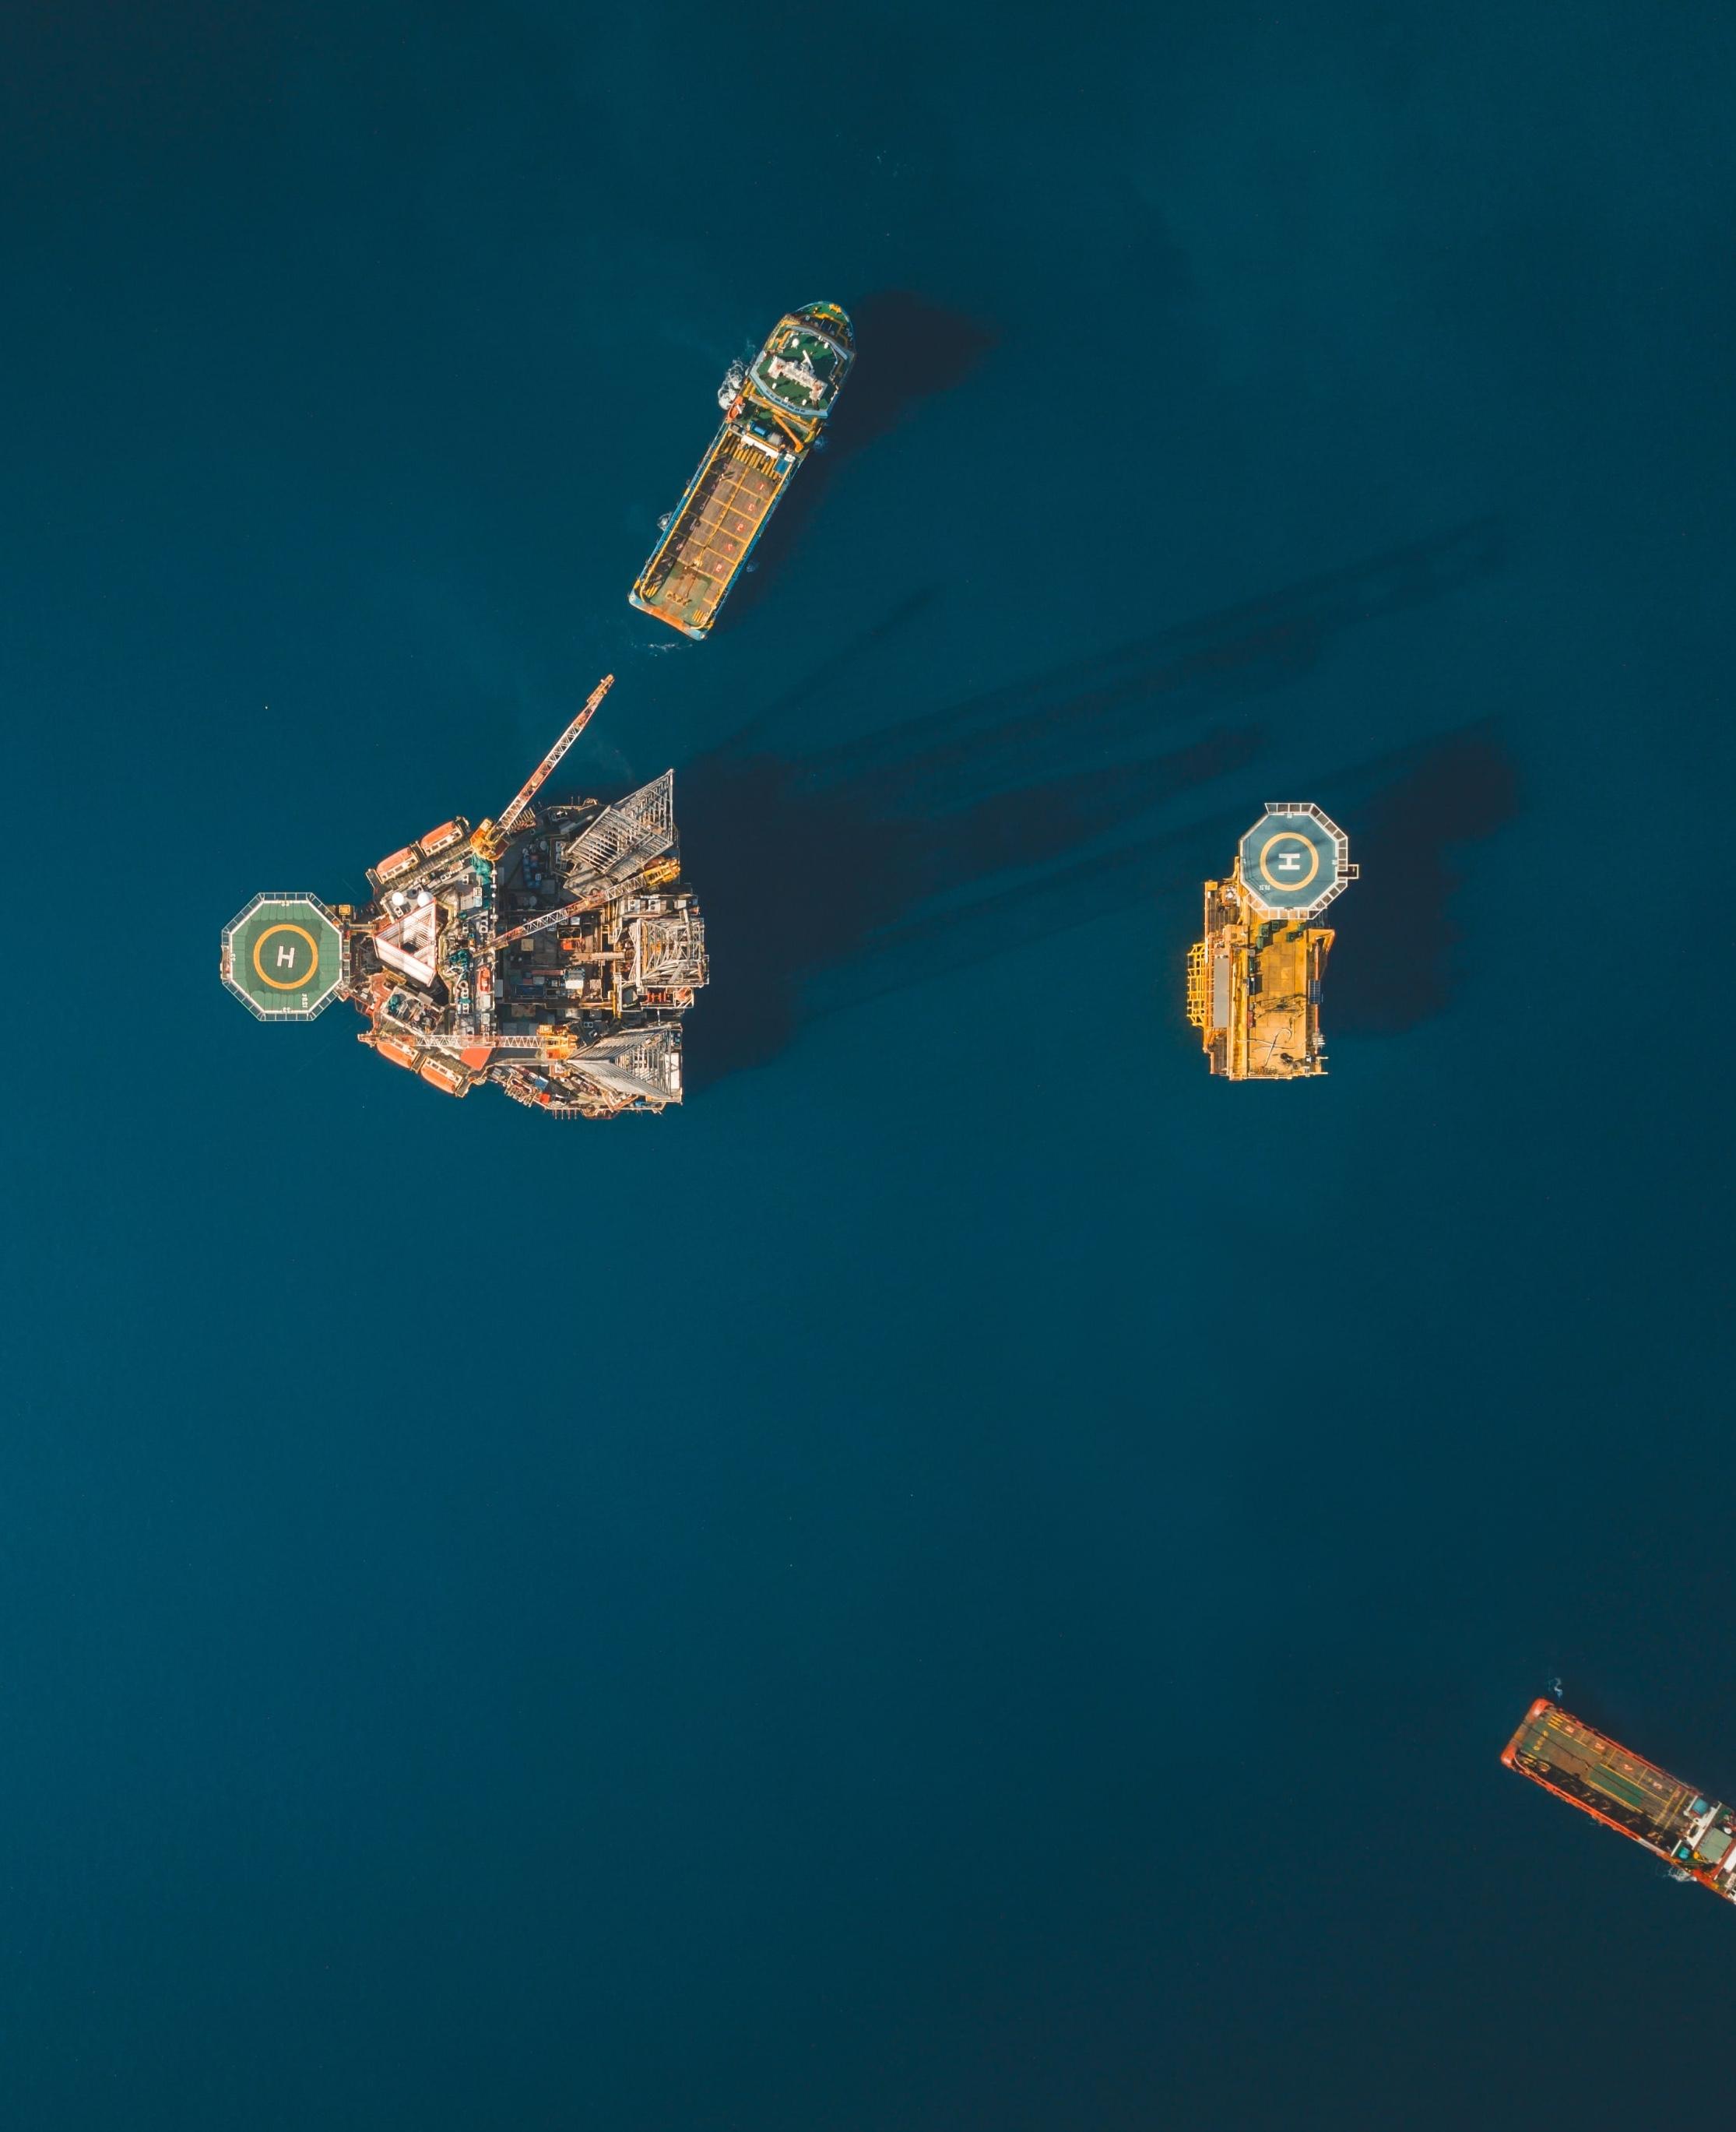 Aerial view of oil rig operation